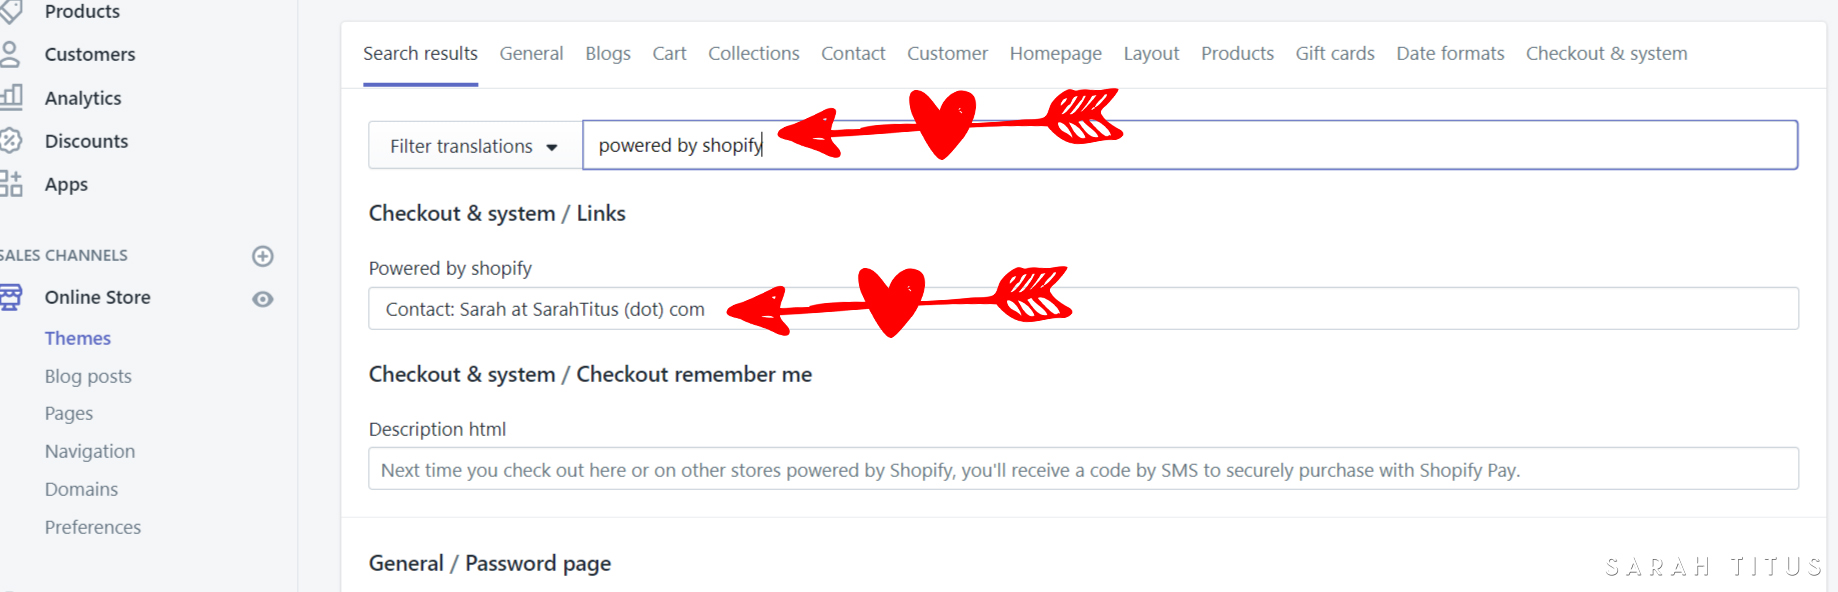 Does the "Powered by Shopify" byline bug you? It bugged me too. Here's a step by step guide of how to remove it. Trust me, it's super duper simple!